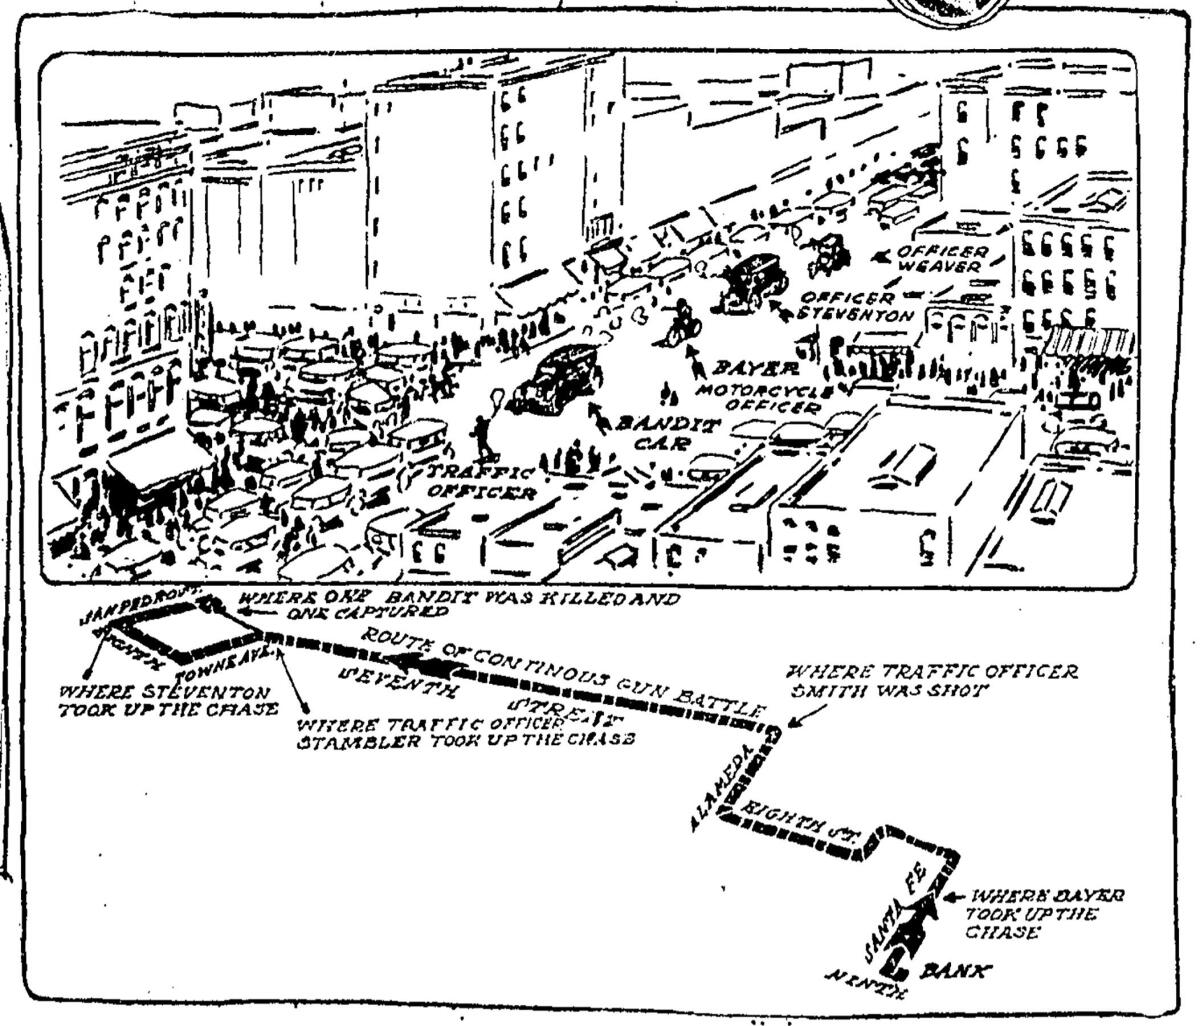 Graphic published in the Aug. 23, 1925, Los Angeles Times illustrating the bank holdup and shootout in downtown Los Angeles.